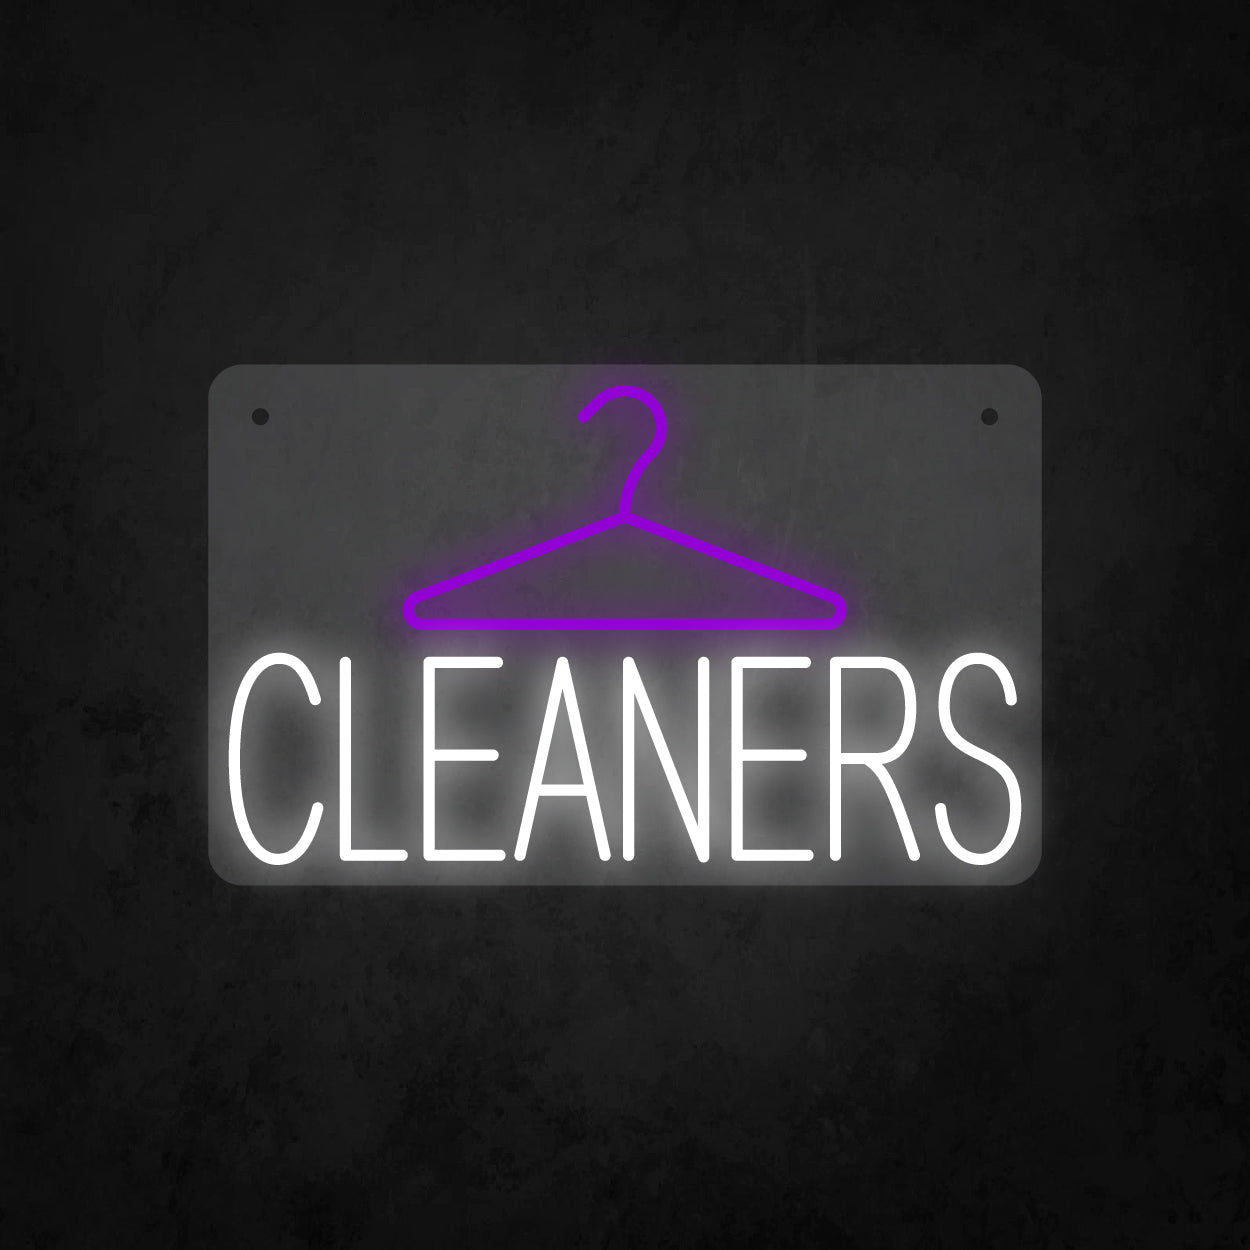 LED Neon Sign - Hanger and Cleaners